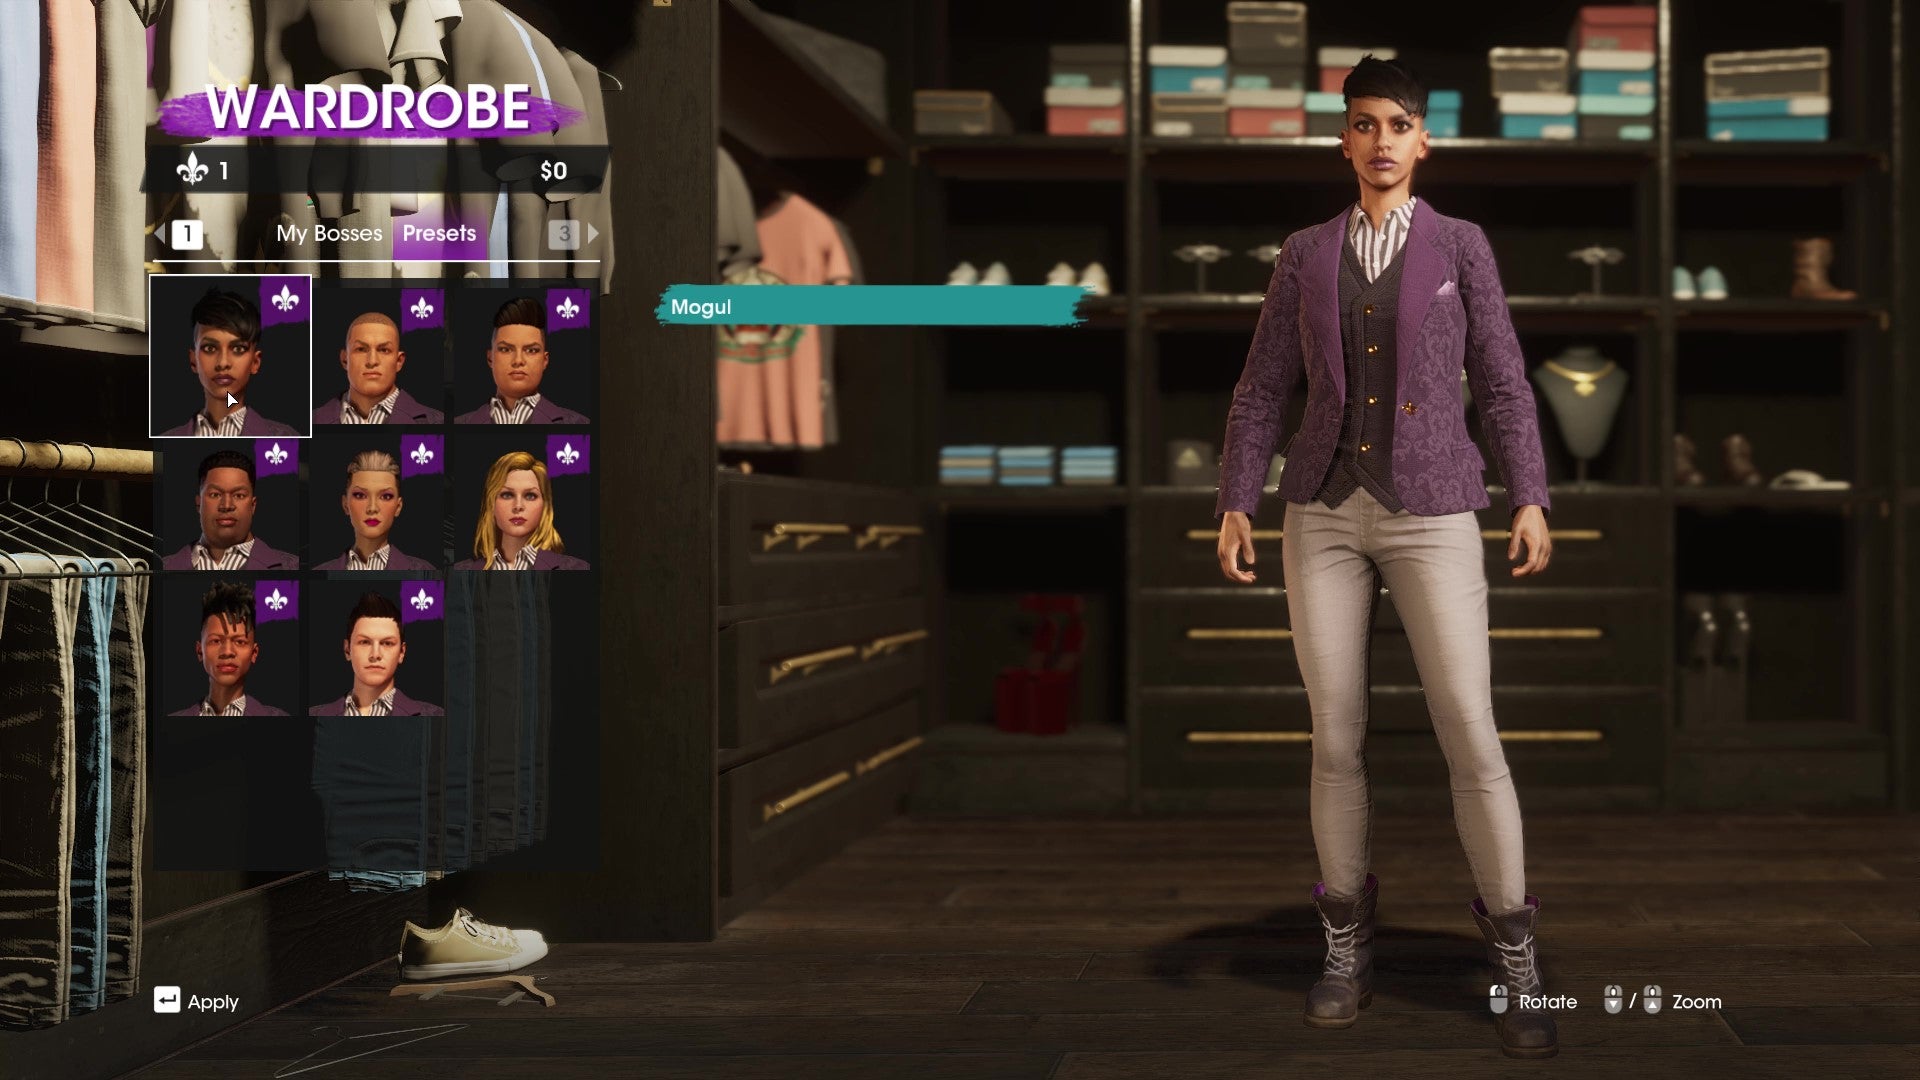 The initial character creation screen in Saints Row, showing the variety of default appearances for the Boss.